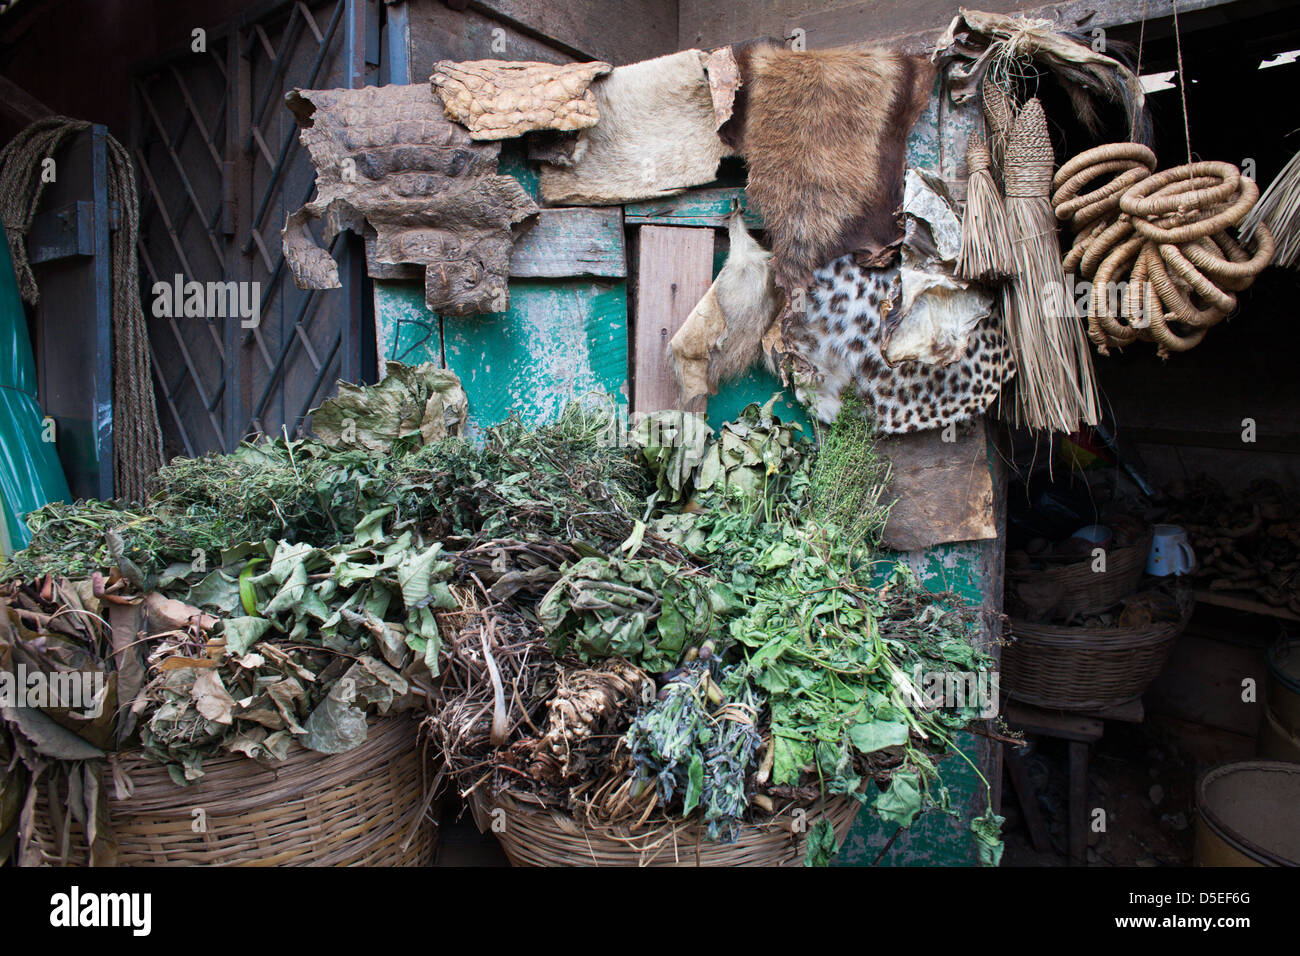 Various herbs and animal skins on sale in Timber Market in Accra, Ghana. Stock Photo